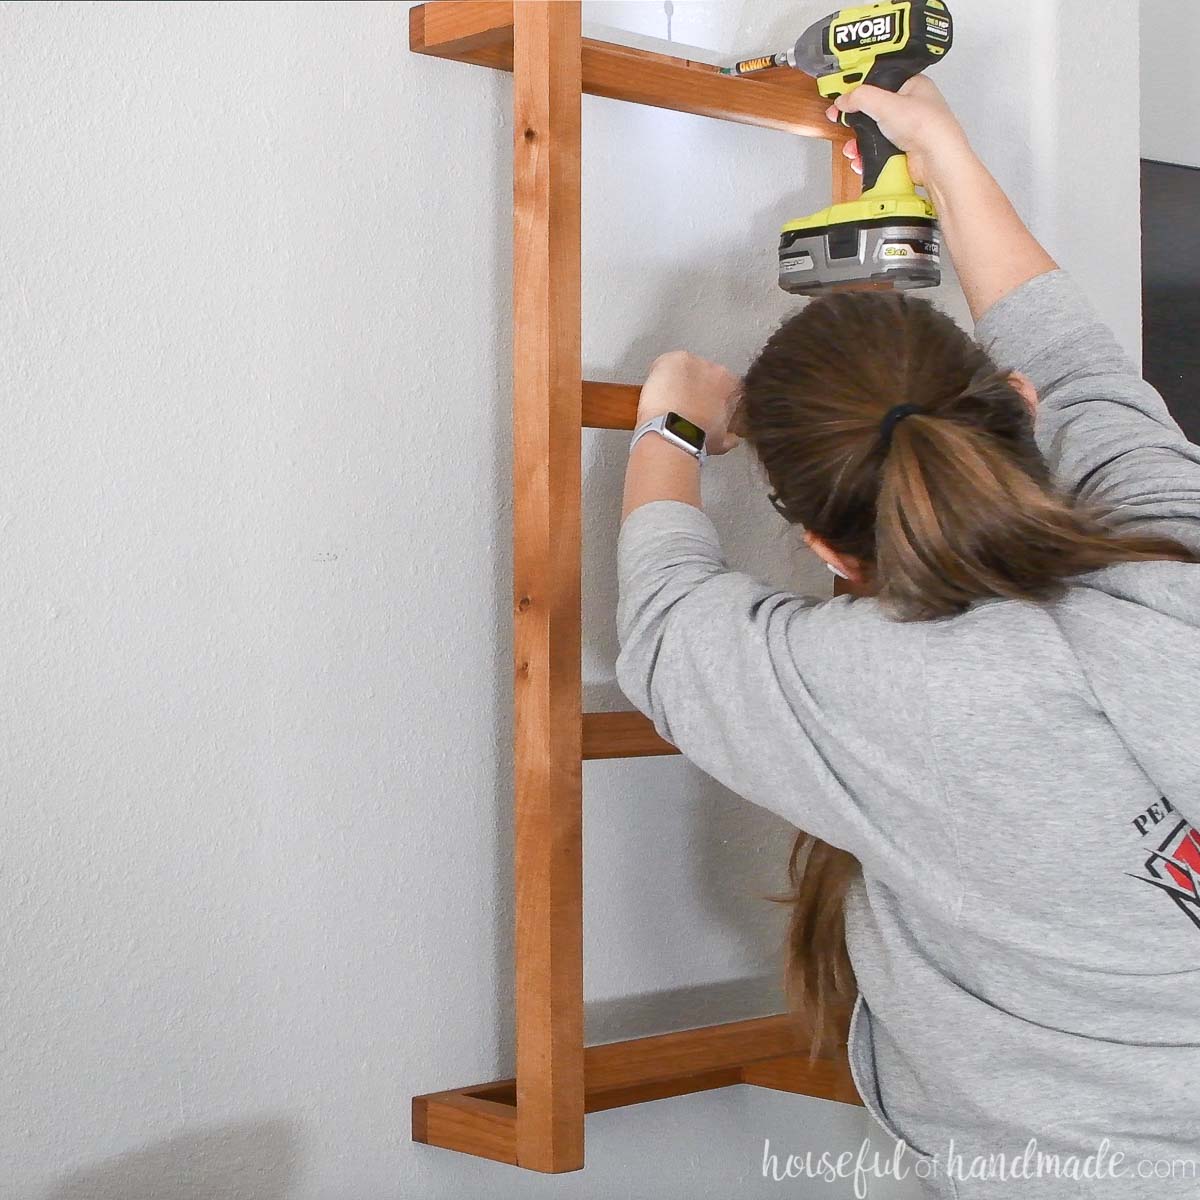 Securing the wooden wall ladder to the wall. 